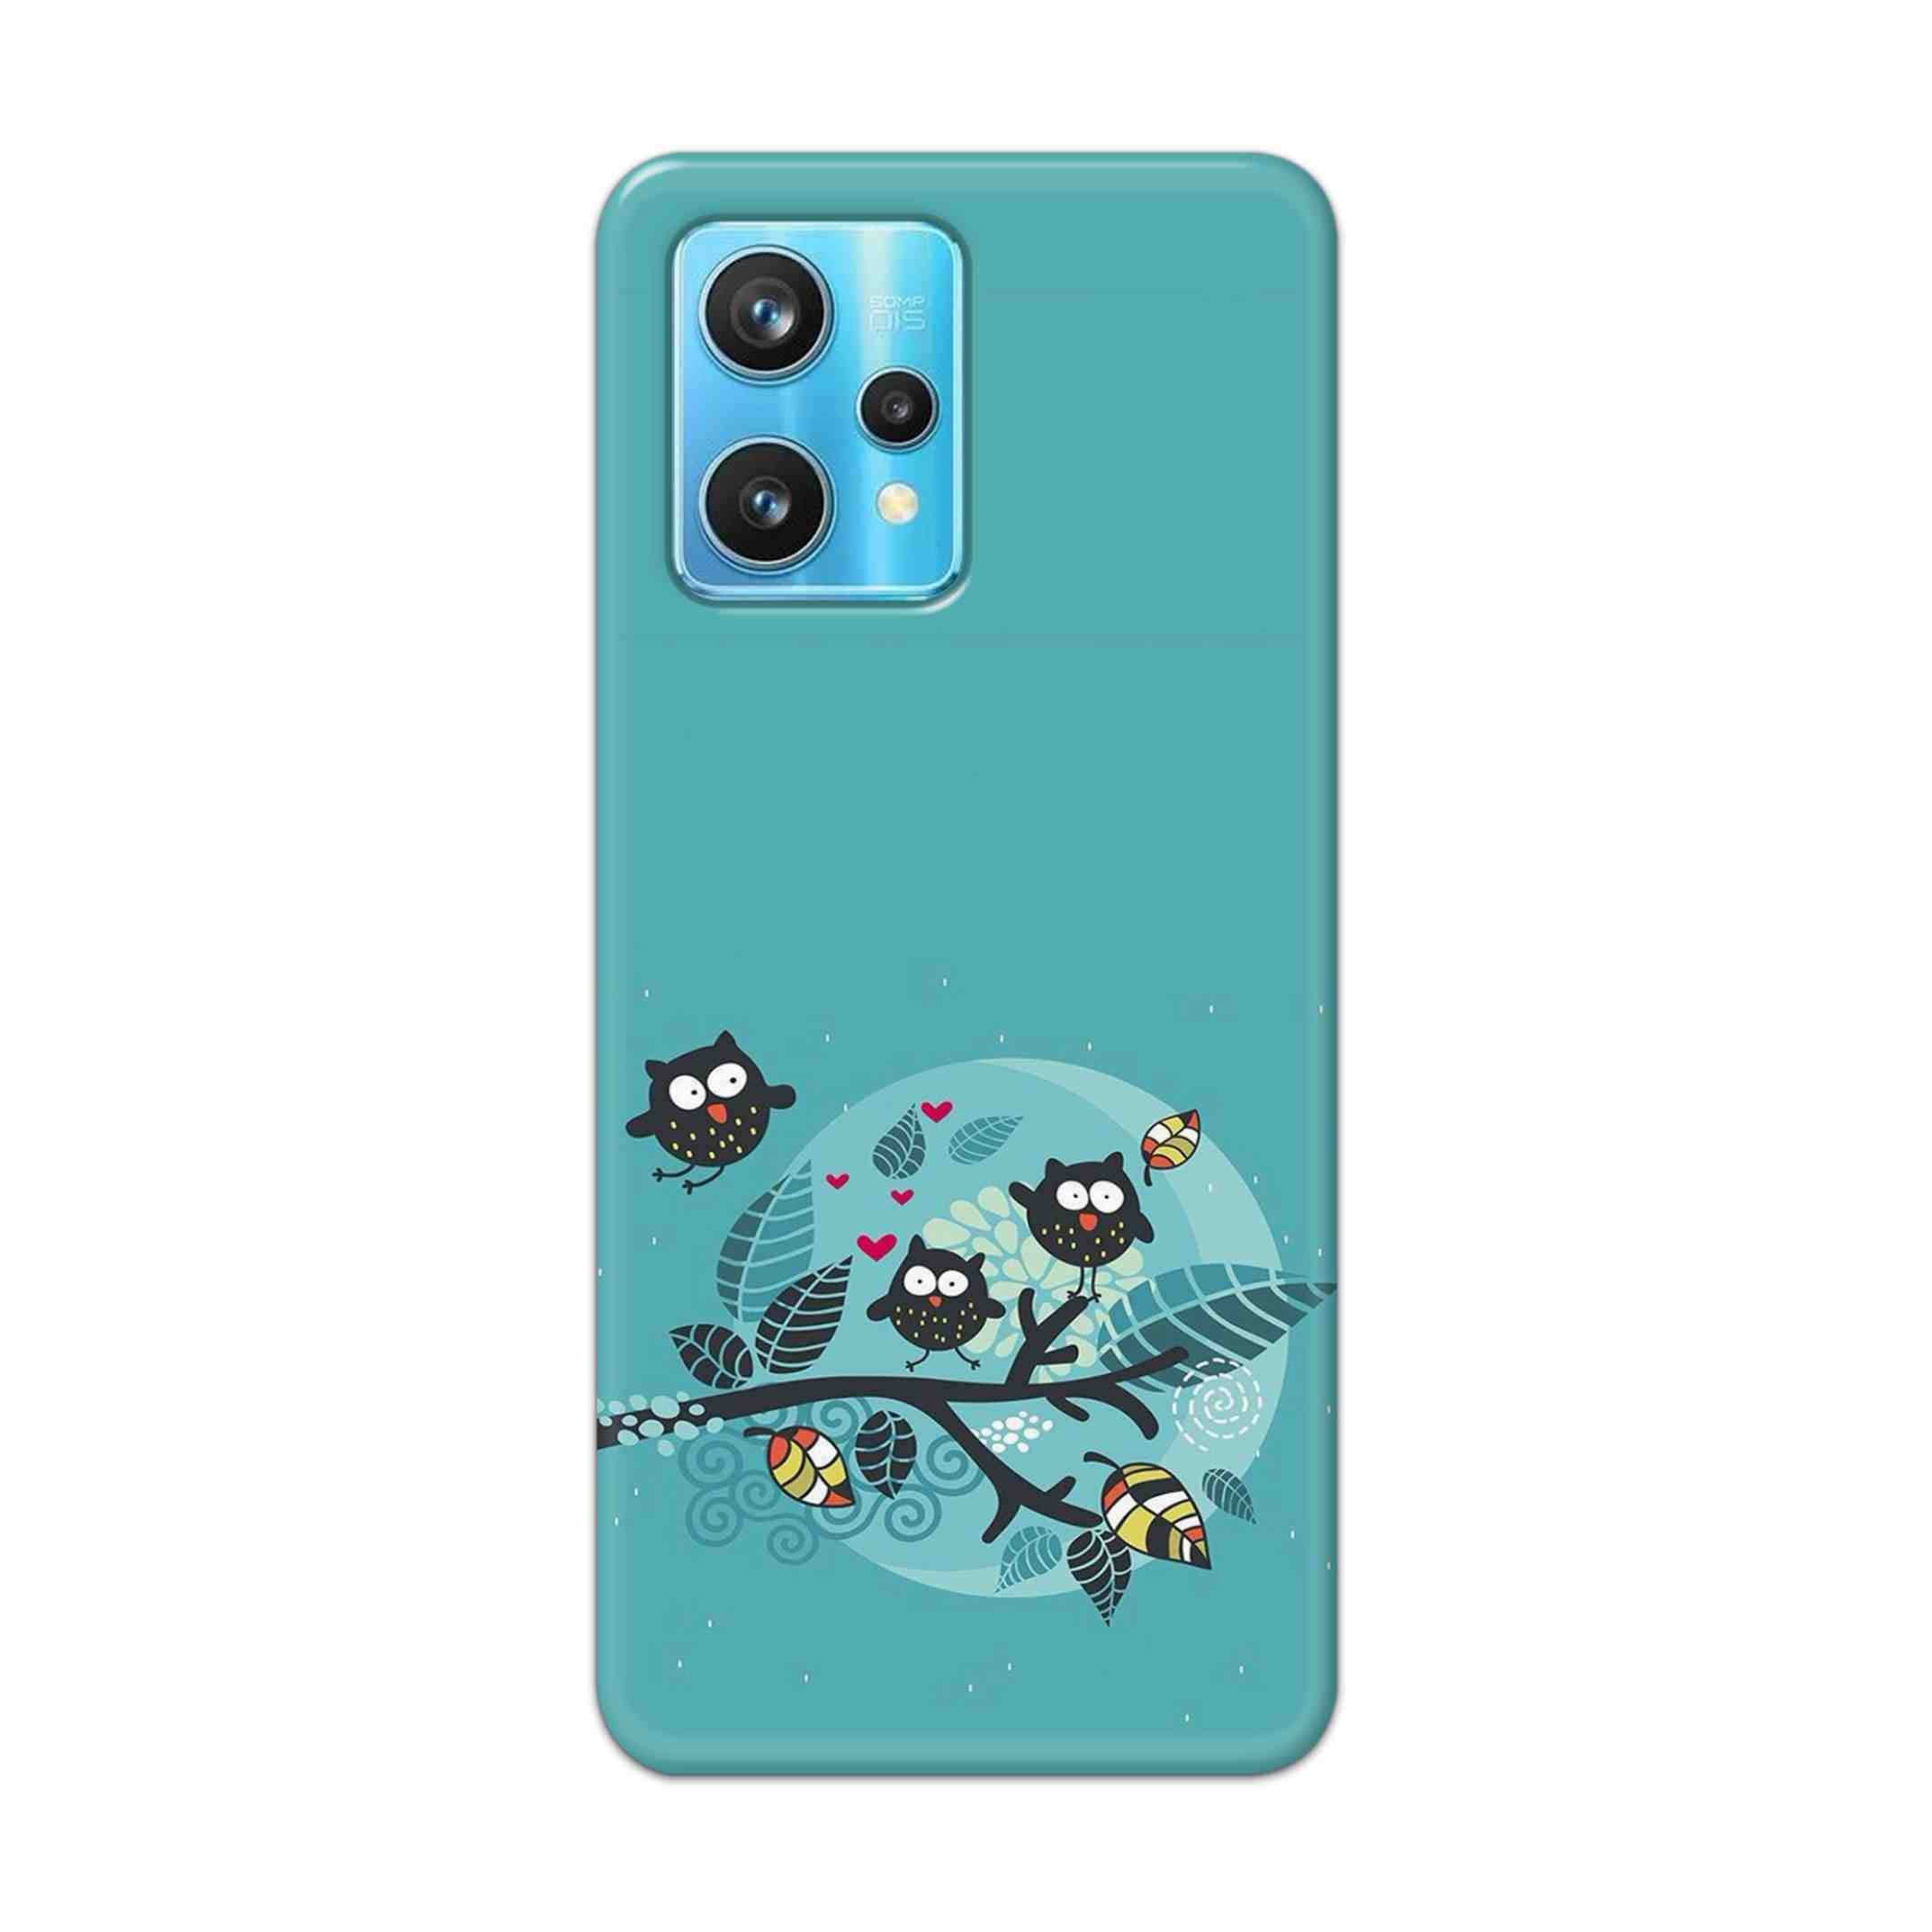 Buy Owl Hard Back Mobile Phone Case Cover For Realme 9 Pro Plus Online